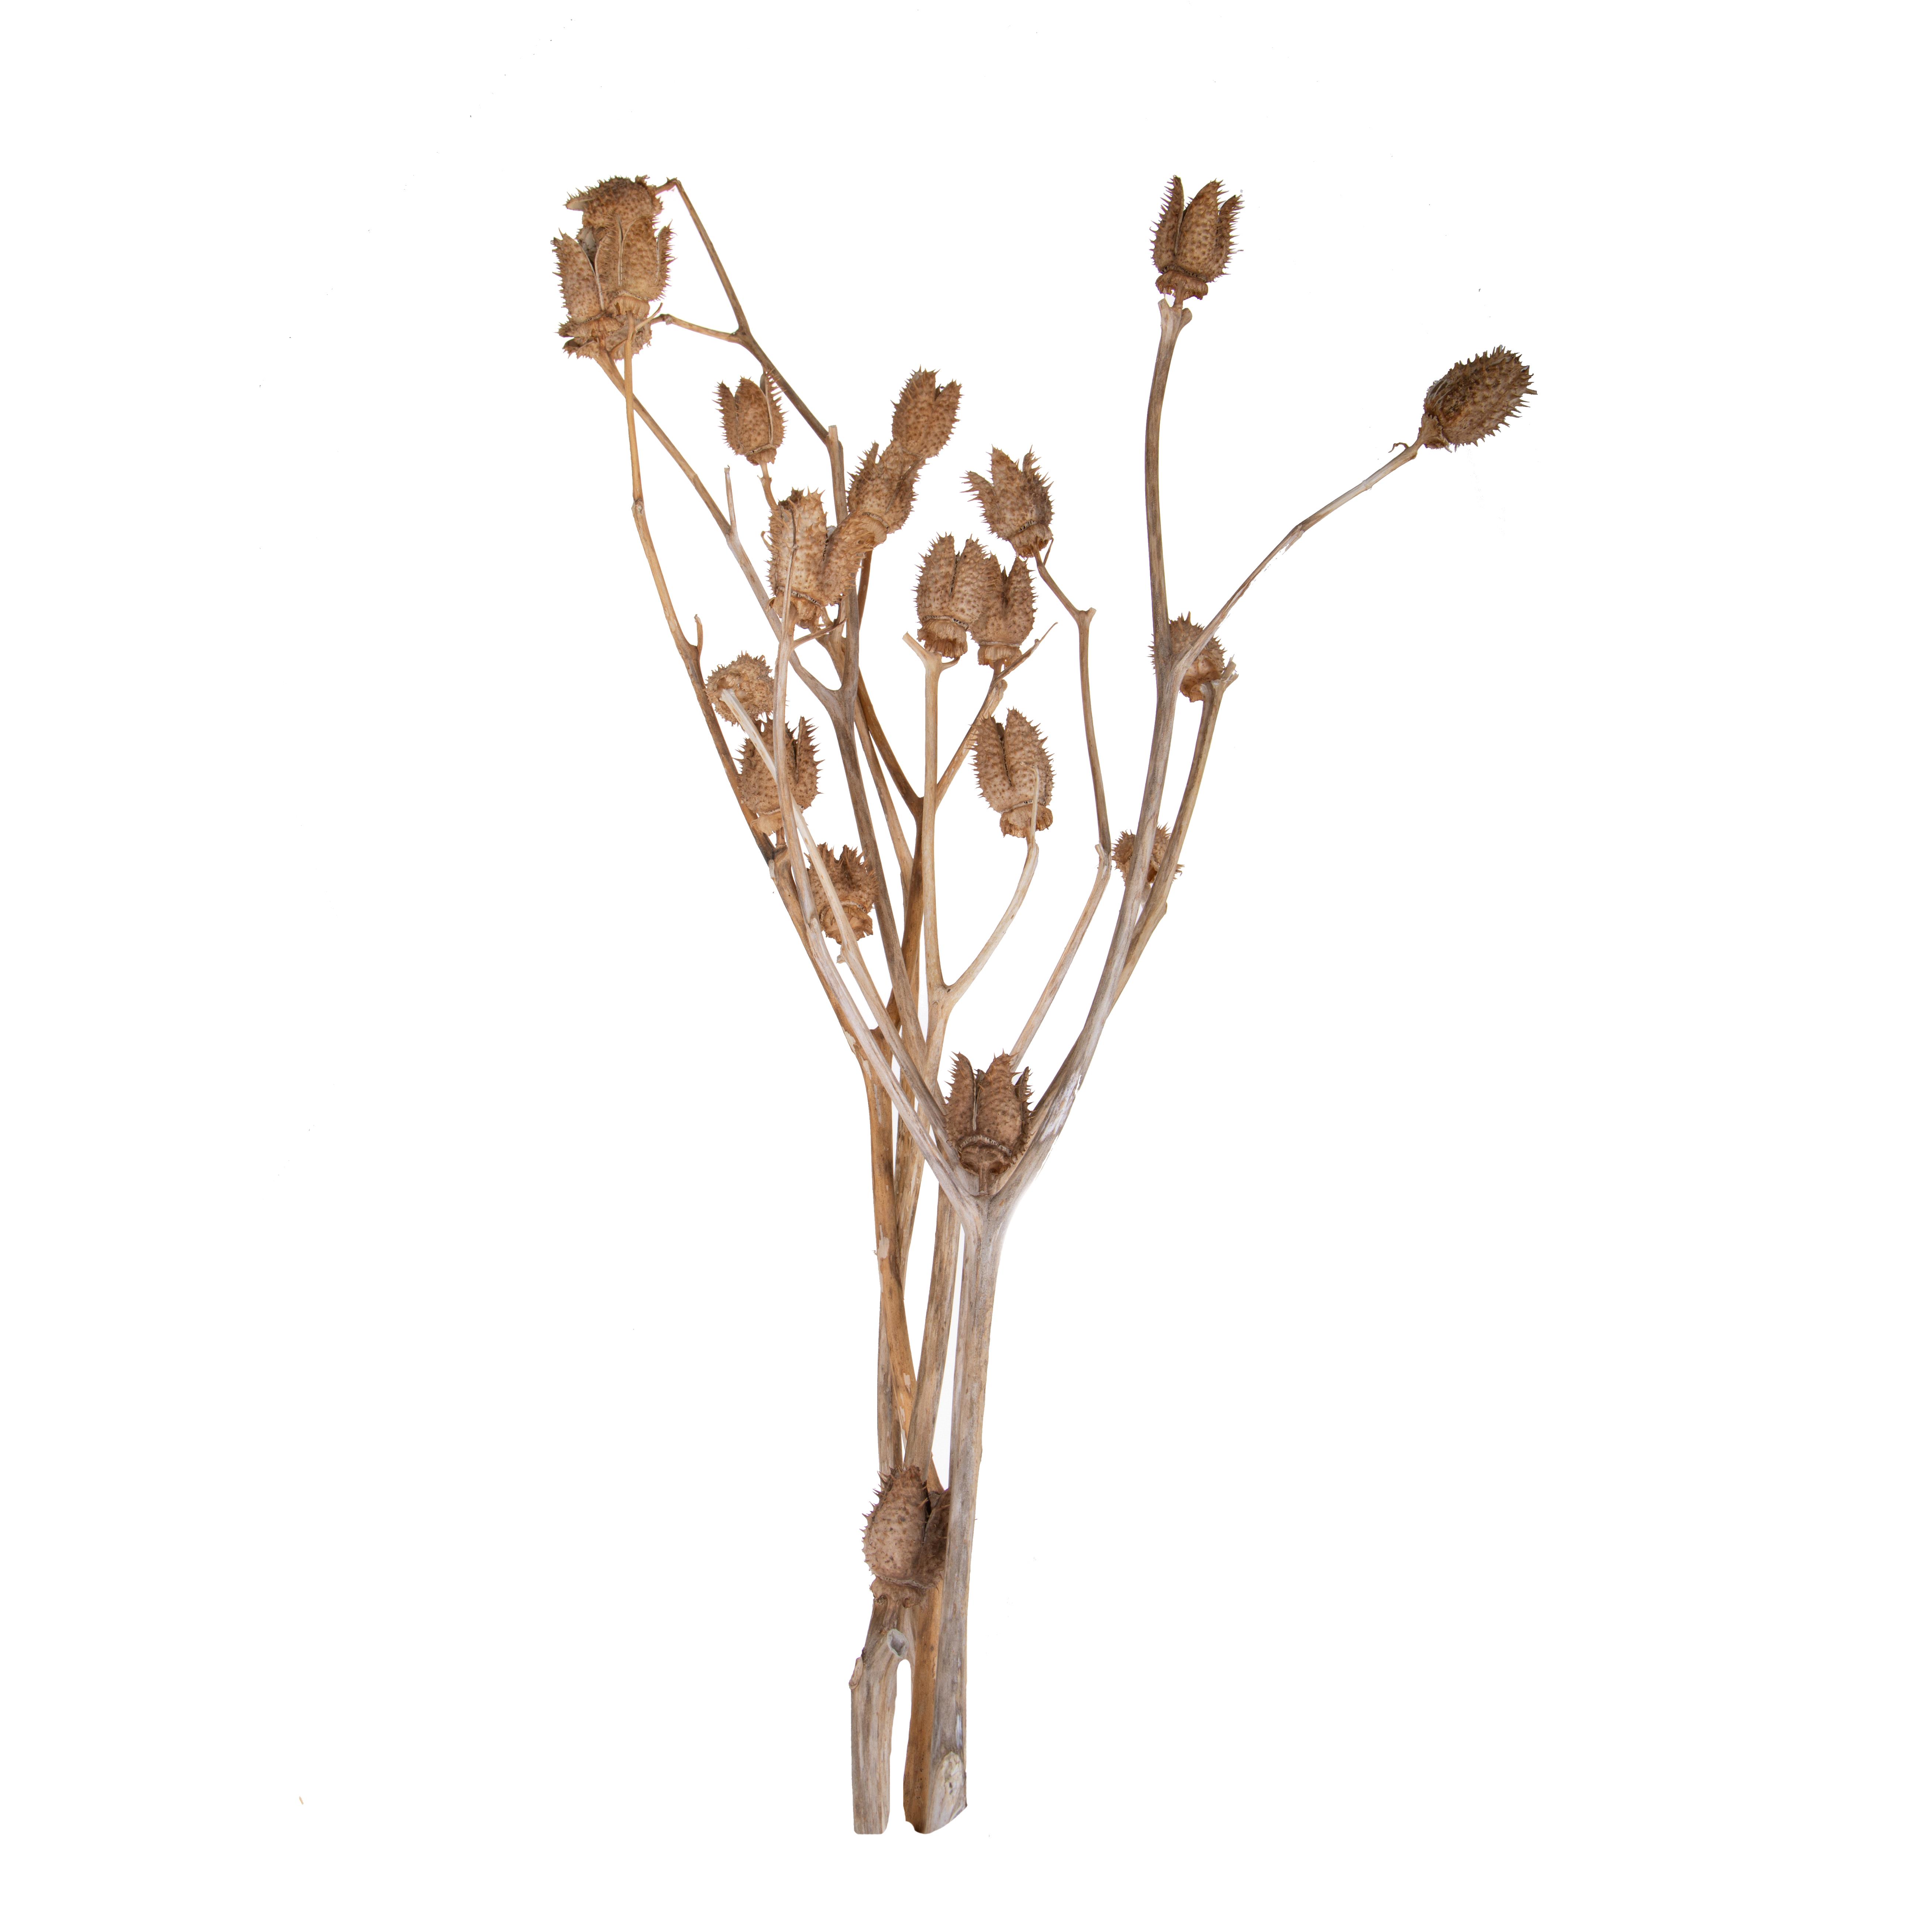 NATURAL PRODUCTS DRIED FLOWERS AND ERBS,STRAMONIO 4 RAMI 80 CM SACCO